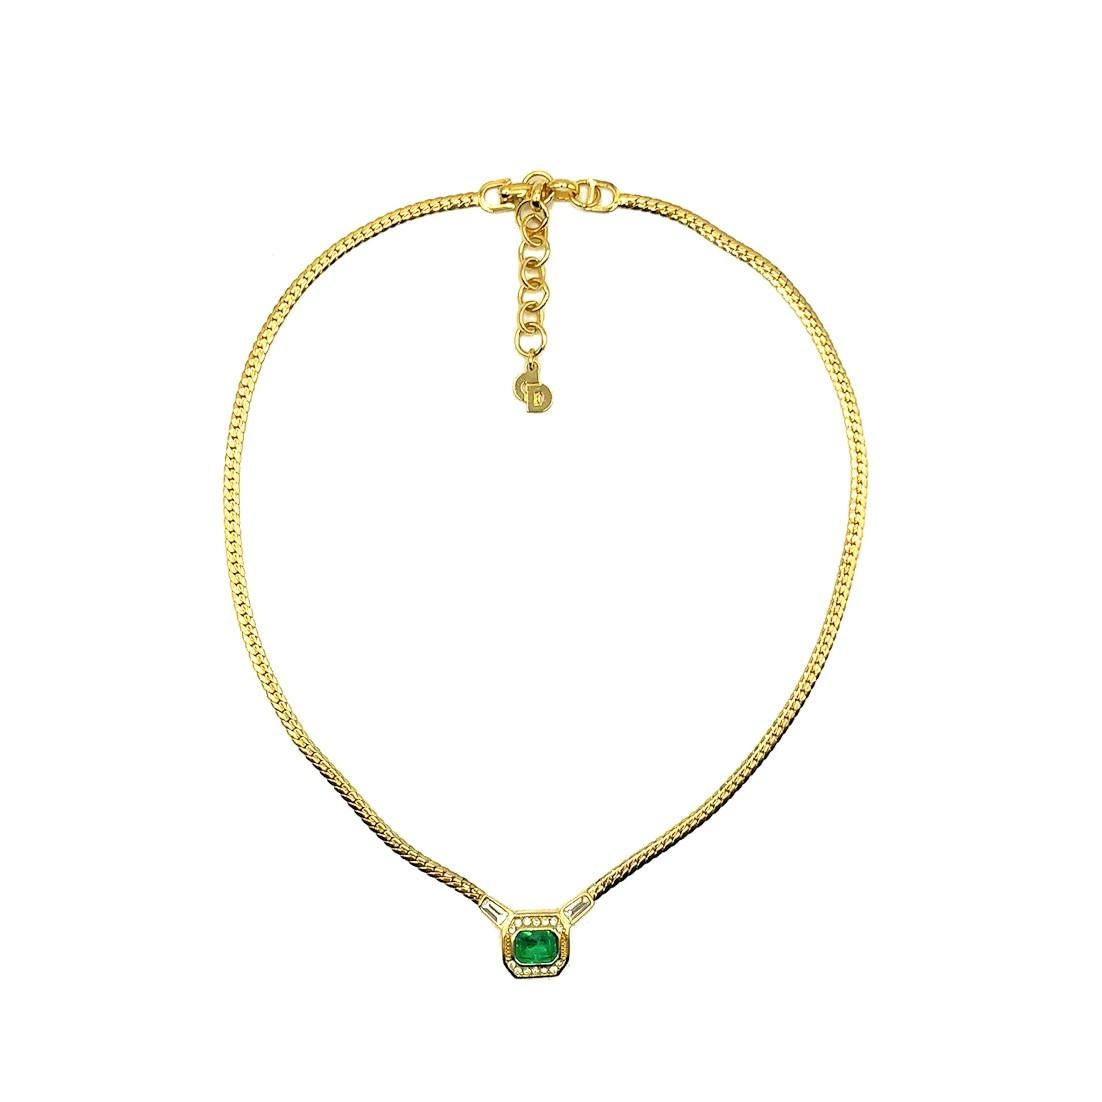 A beautiful Vintage Dior Emerald Necklace. Crafted in gold plated metal and set with a lovely emerald coloured crystal surrounded by clear crystal chaton and tapered baguette stones. In very good vintage condition. Signed. 39-44cms adjustable.